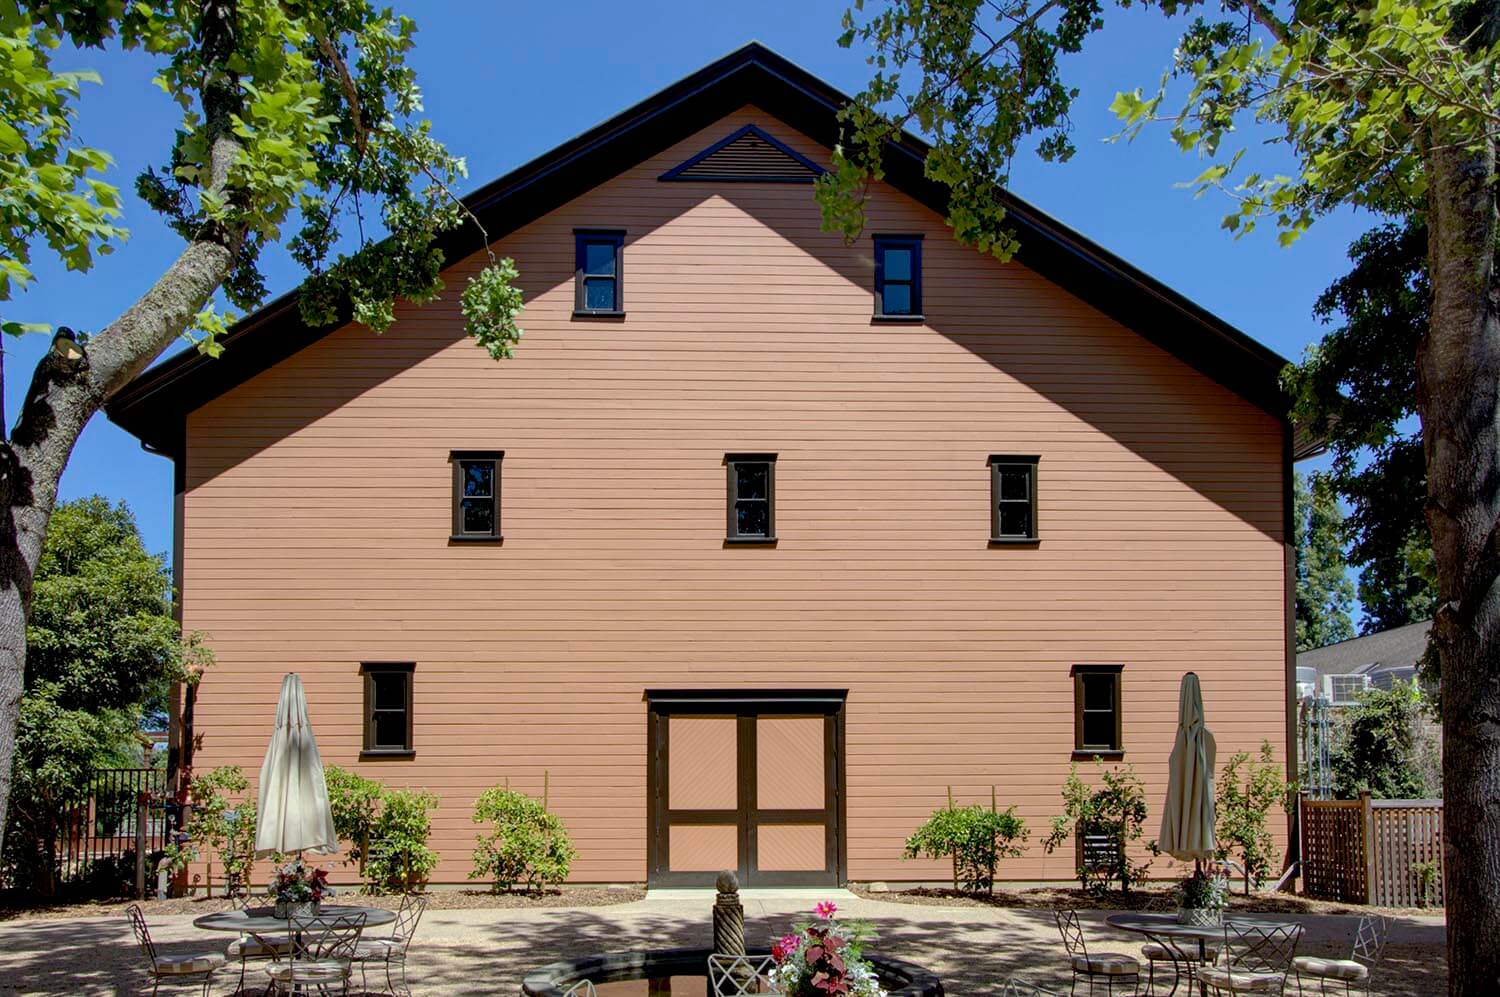 Exterior view of winery building with trees and flowers above courtyard in foreground